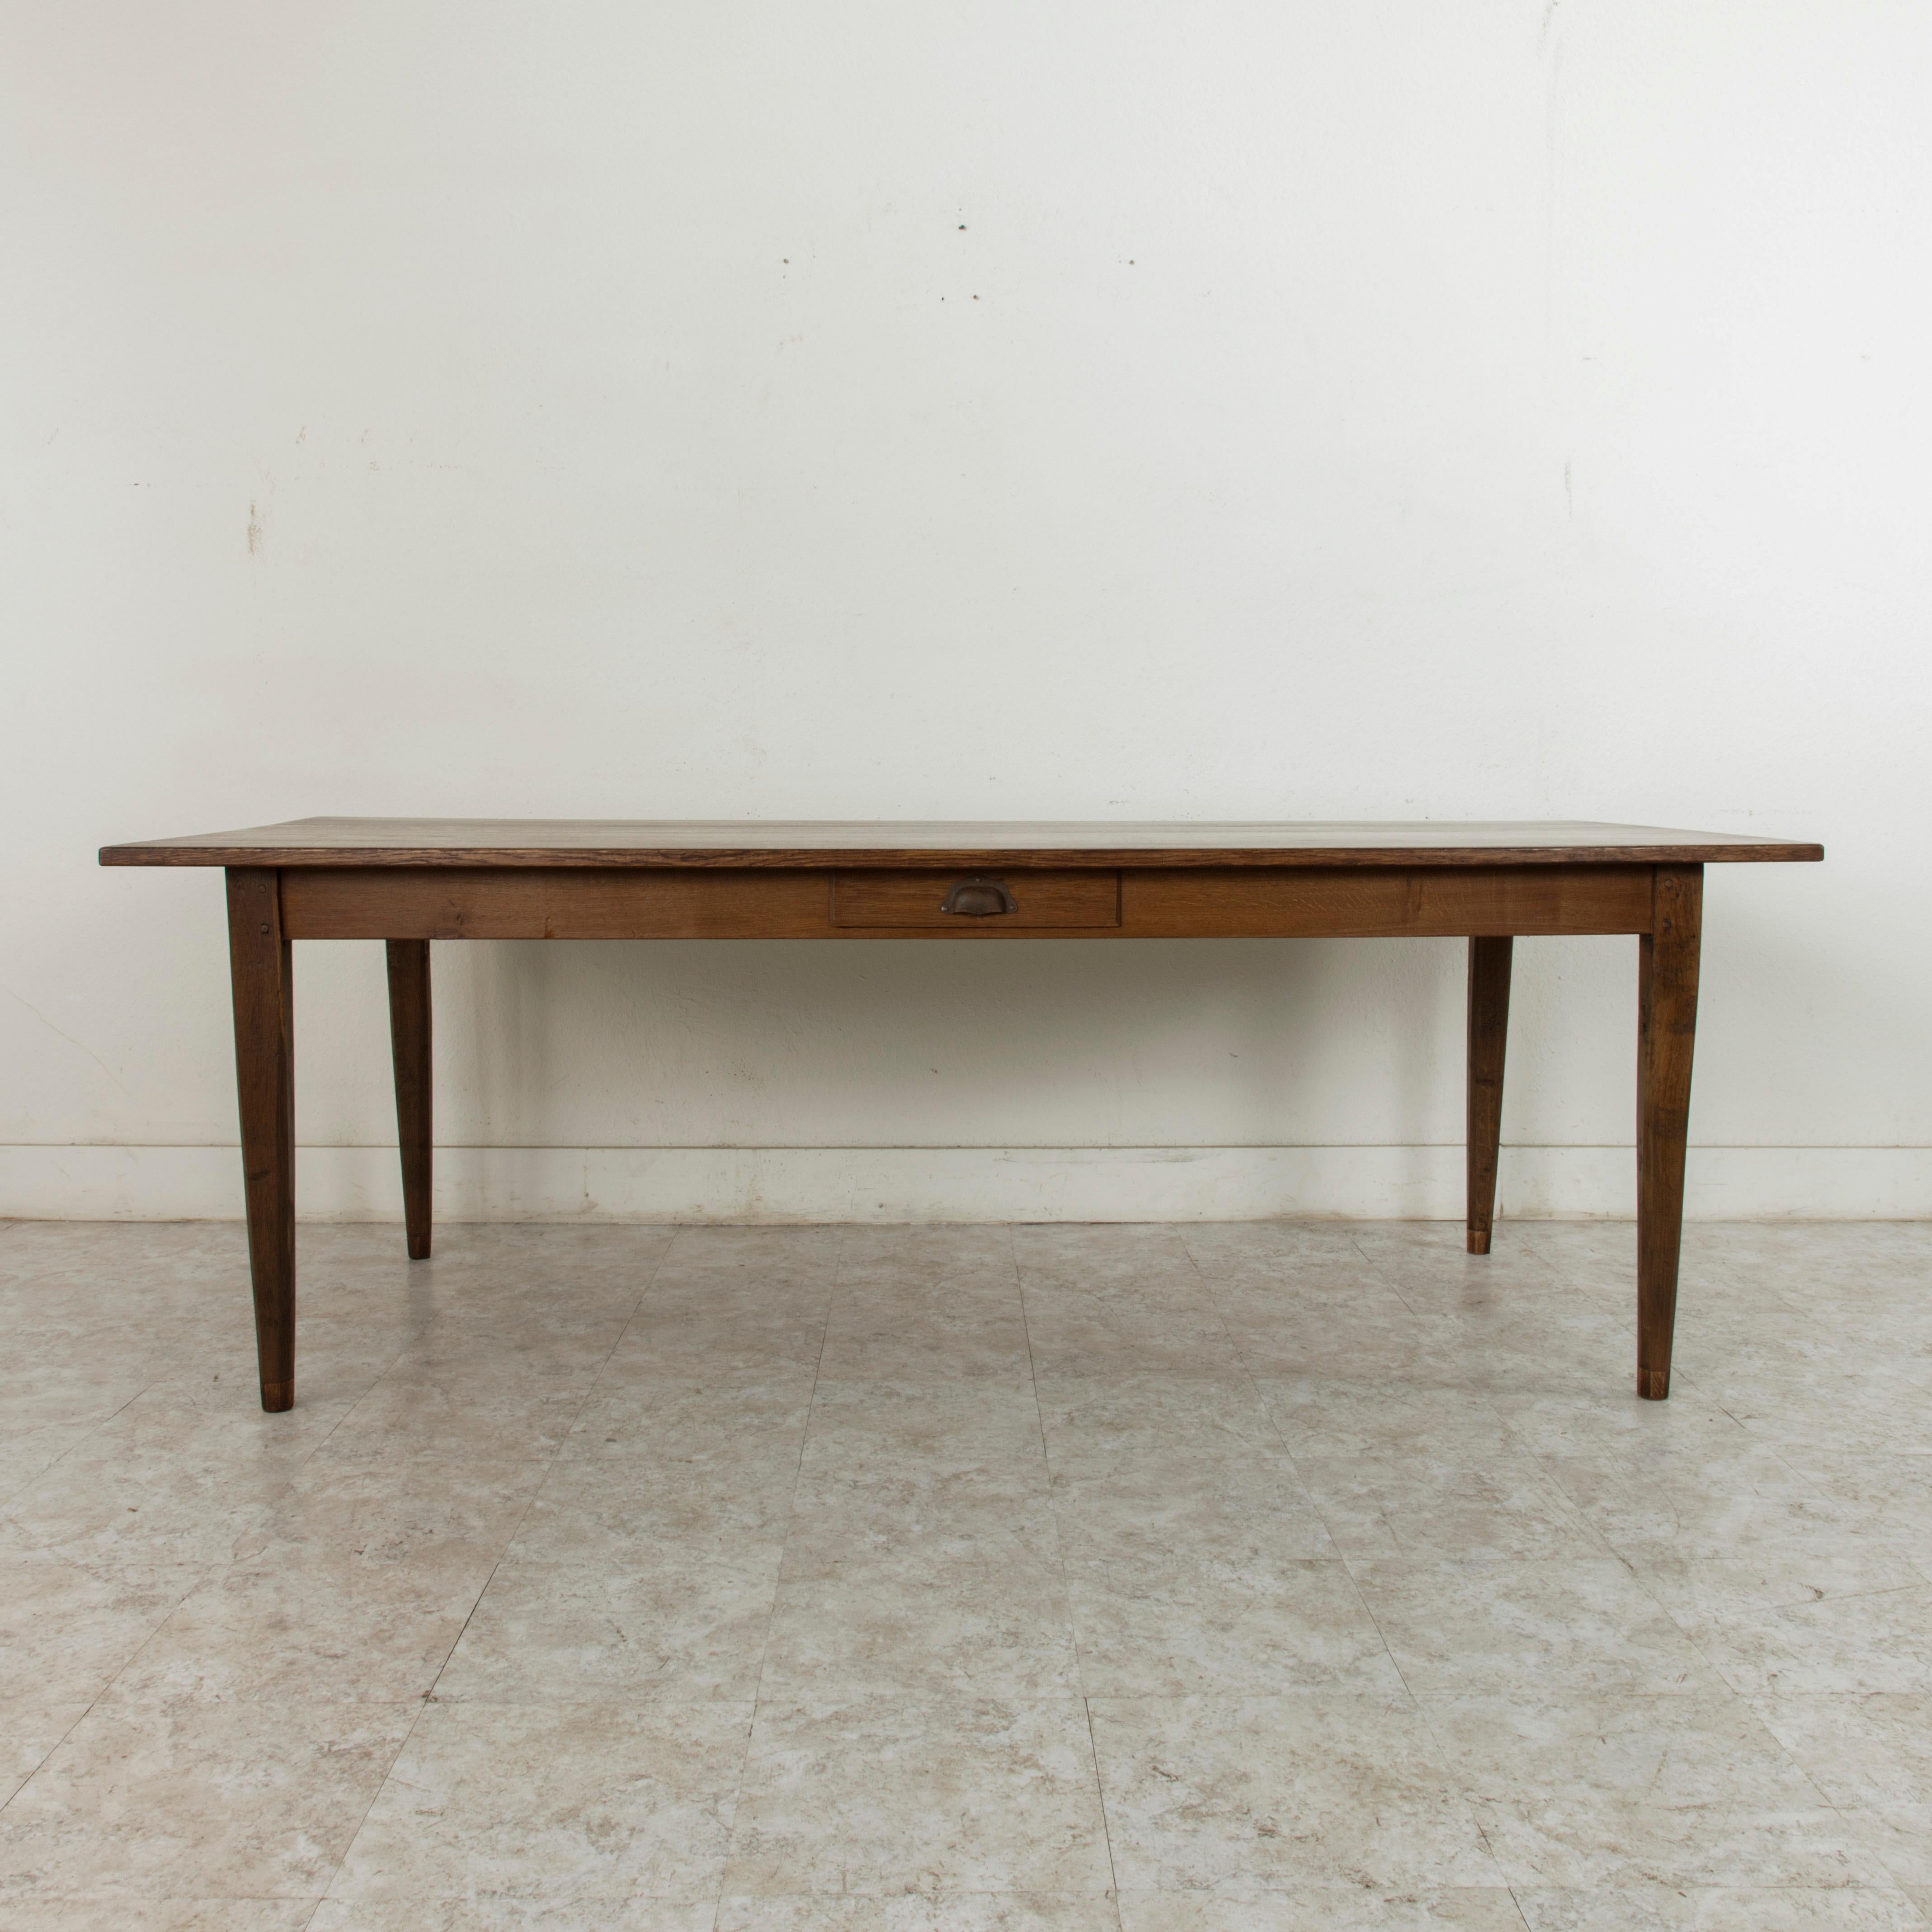 This turn of the 20th century artisan-made farm table is from the region of Le Perche, a sub-region of Normandy, France. Its oak top is constructed using mortise and Tenon joinery and measure 86 inches long and 36.5 inches wide. Resting on a hand